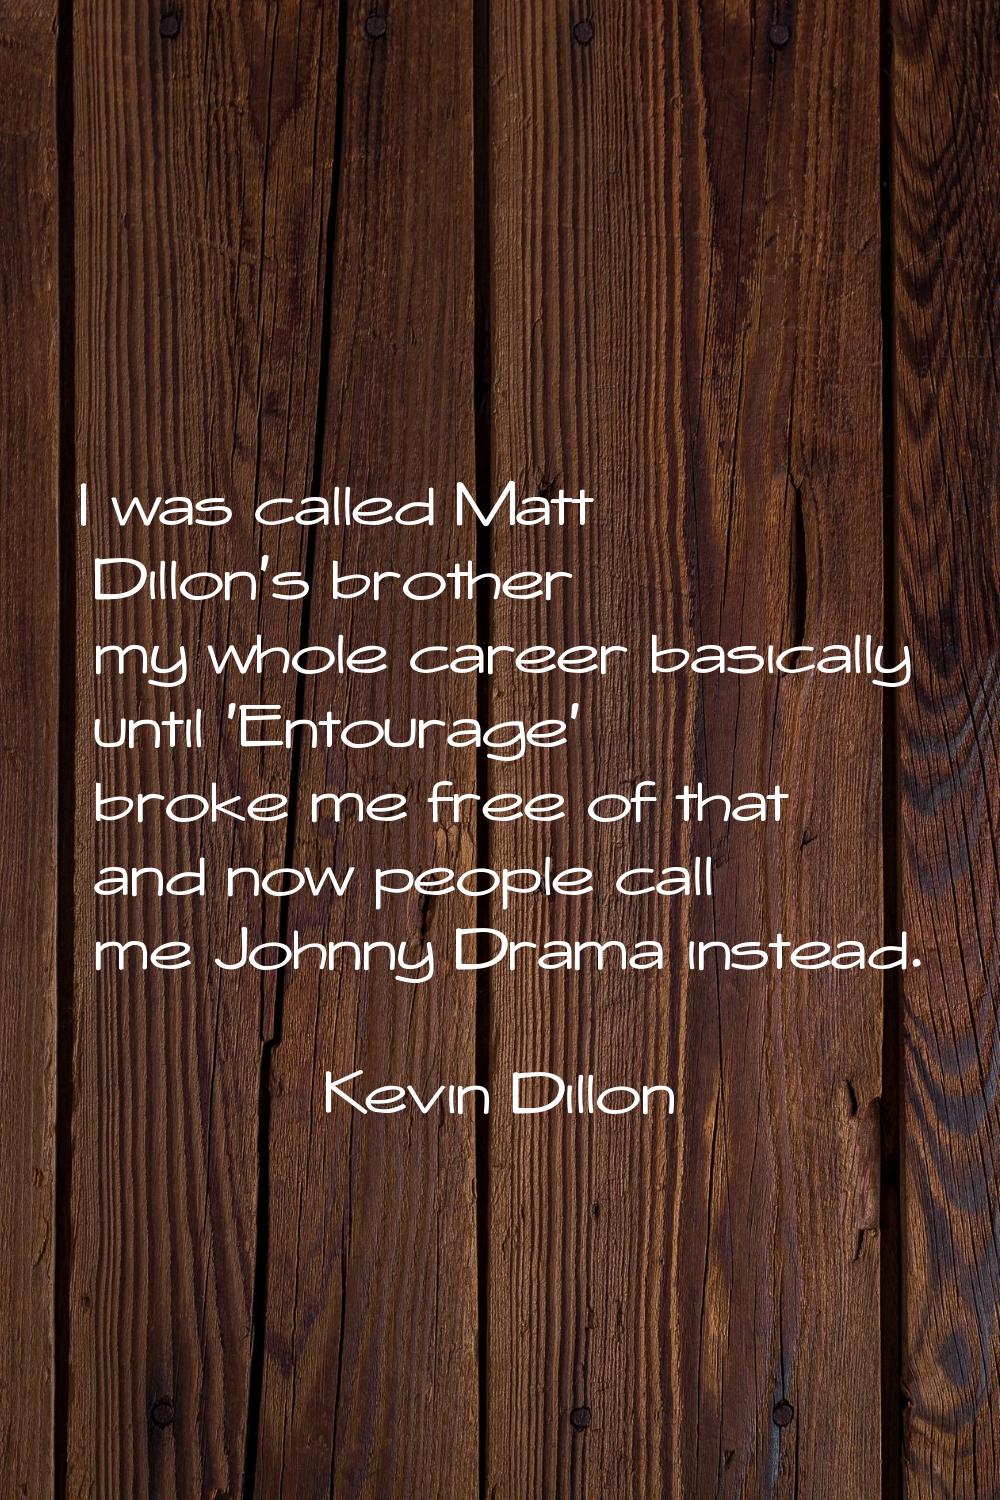 I was called Matt Dillon's brother my whole career basically until 'Entourage' broke me free of tha